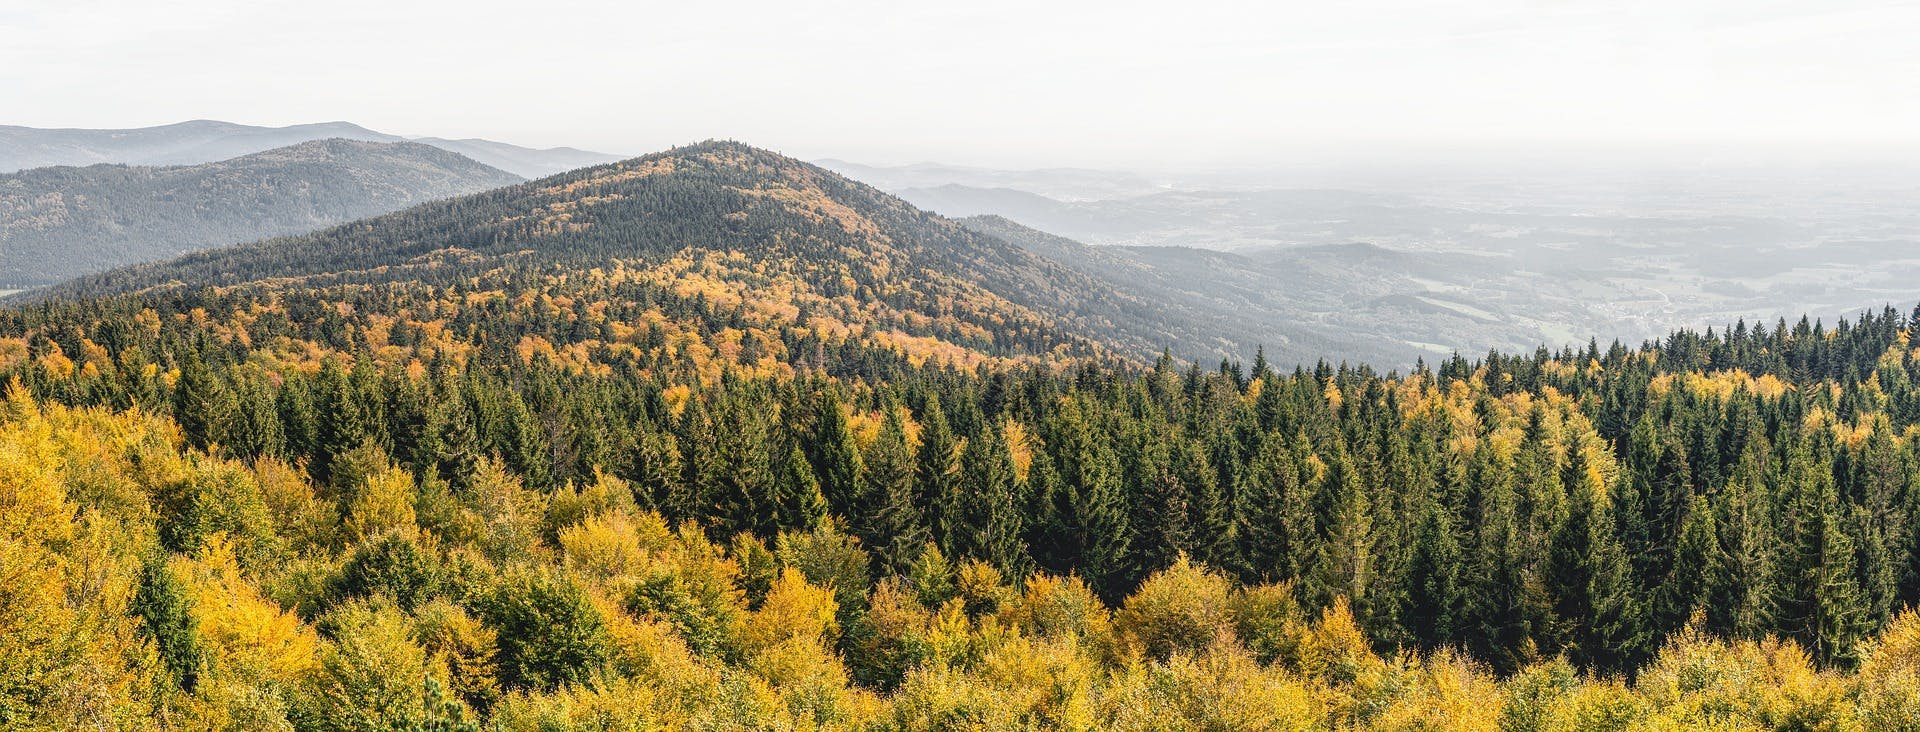 Image taken from the top of a mountain showing mixed forests and Bavarian mountain views. (Photo: Felix Mittermeier)